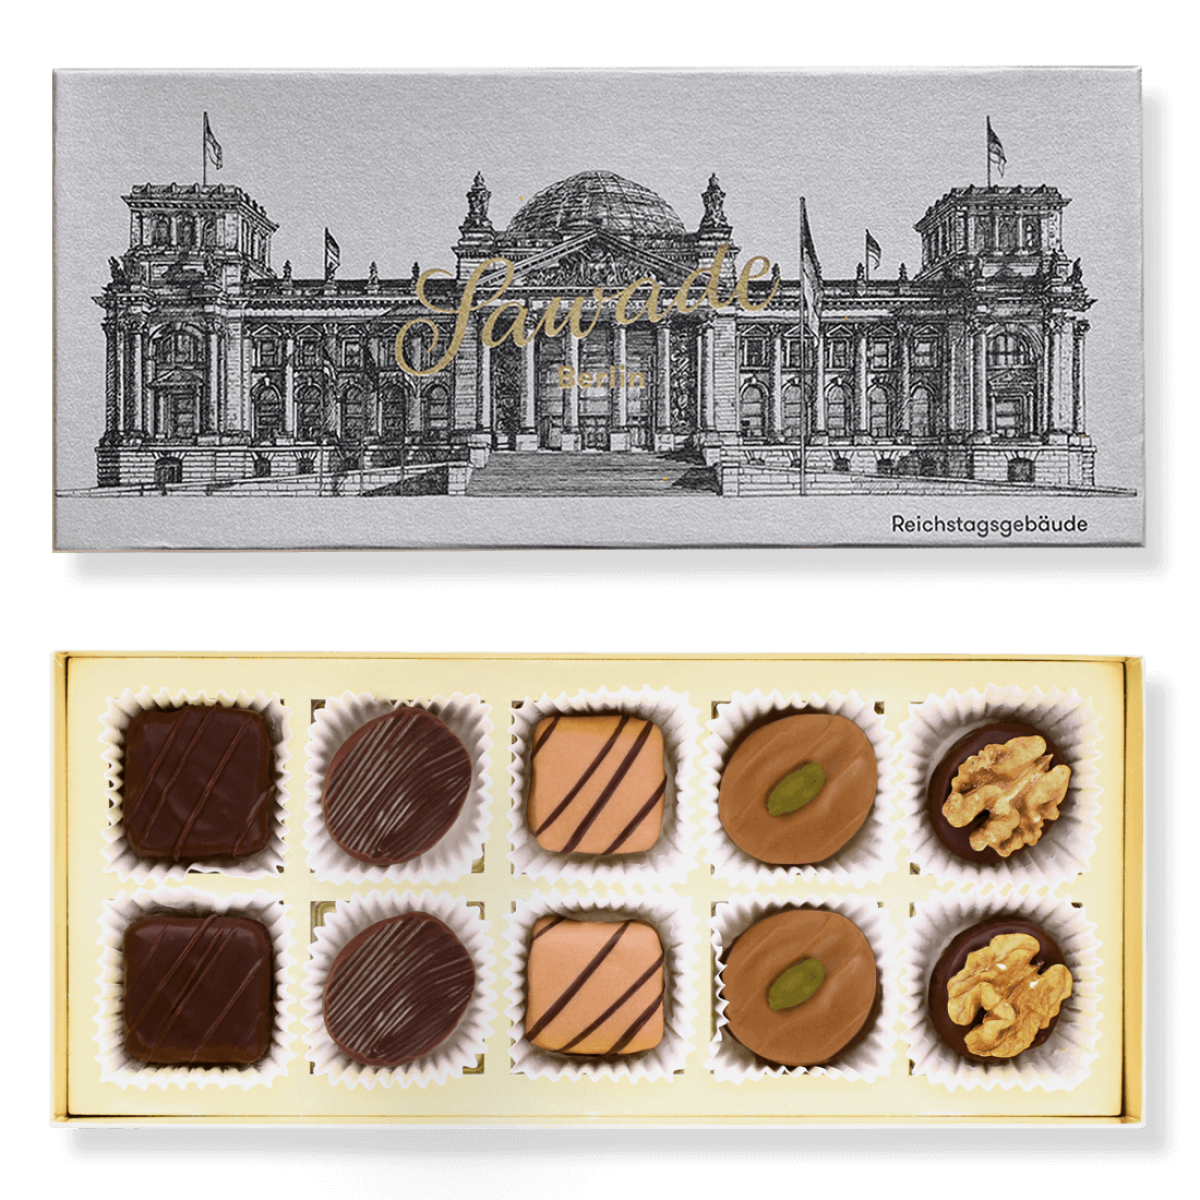 Sawade Box of chocolates Reichstag building Alcohol-free